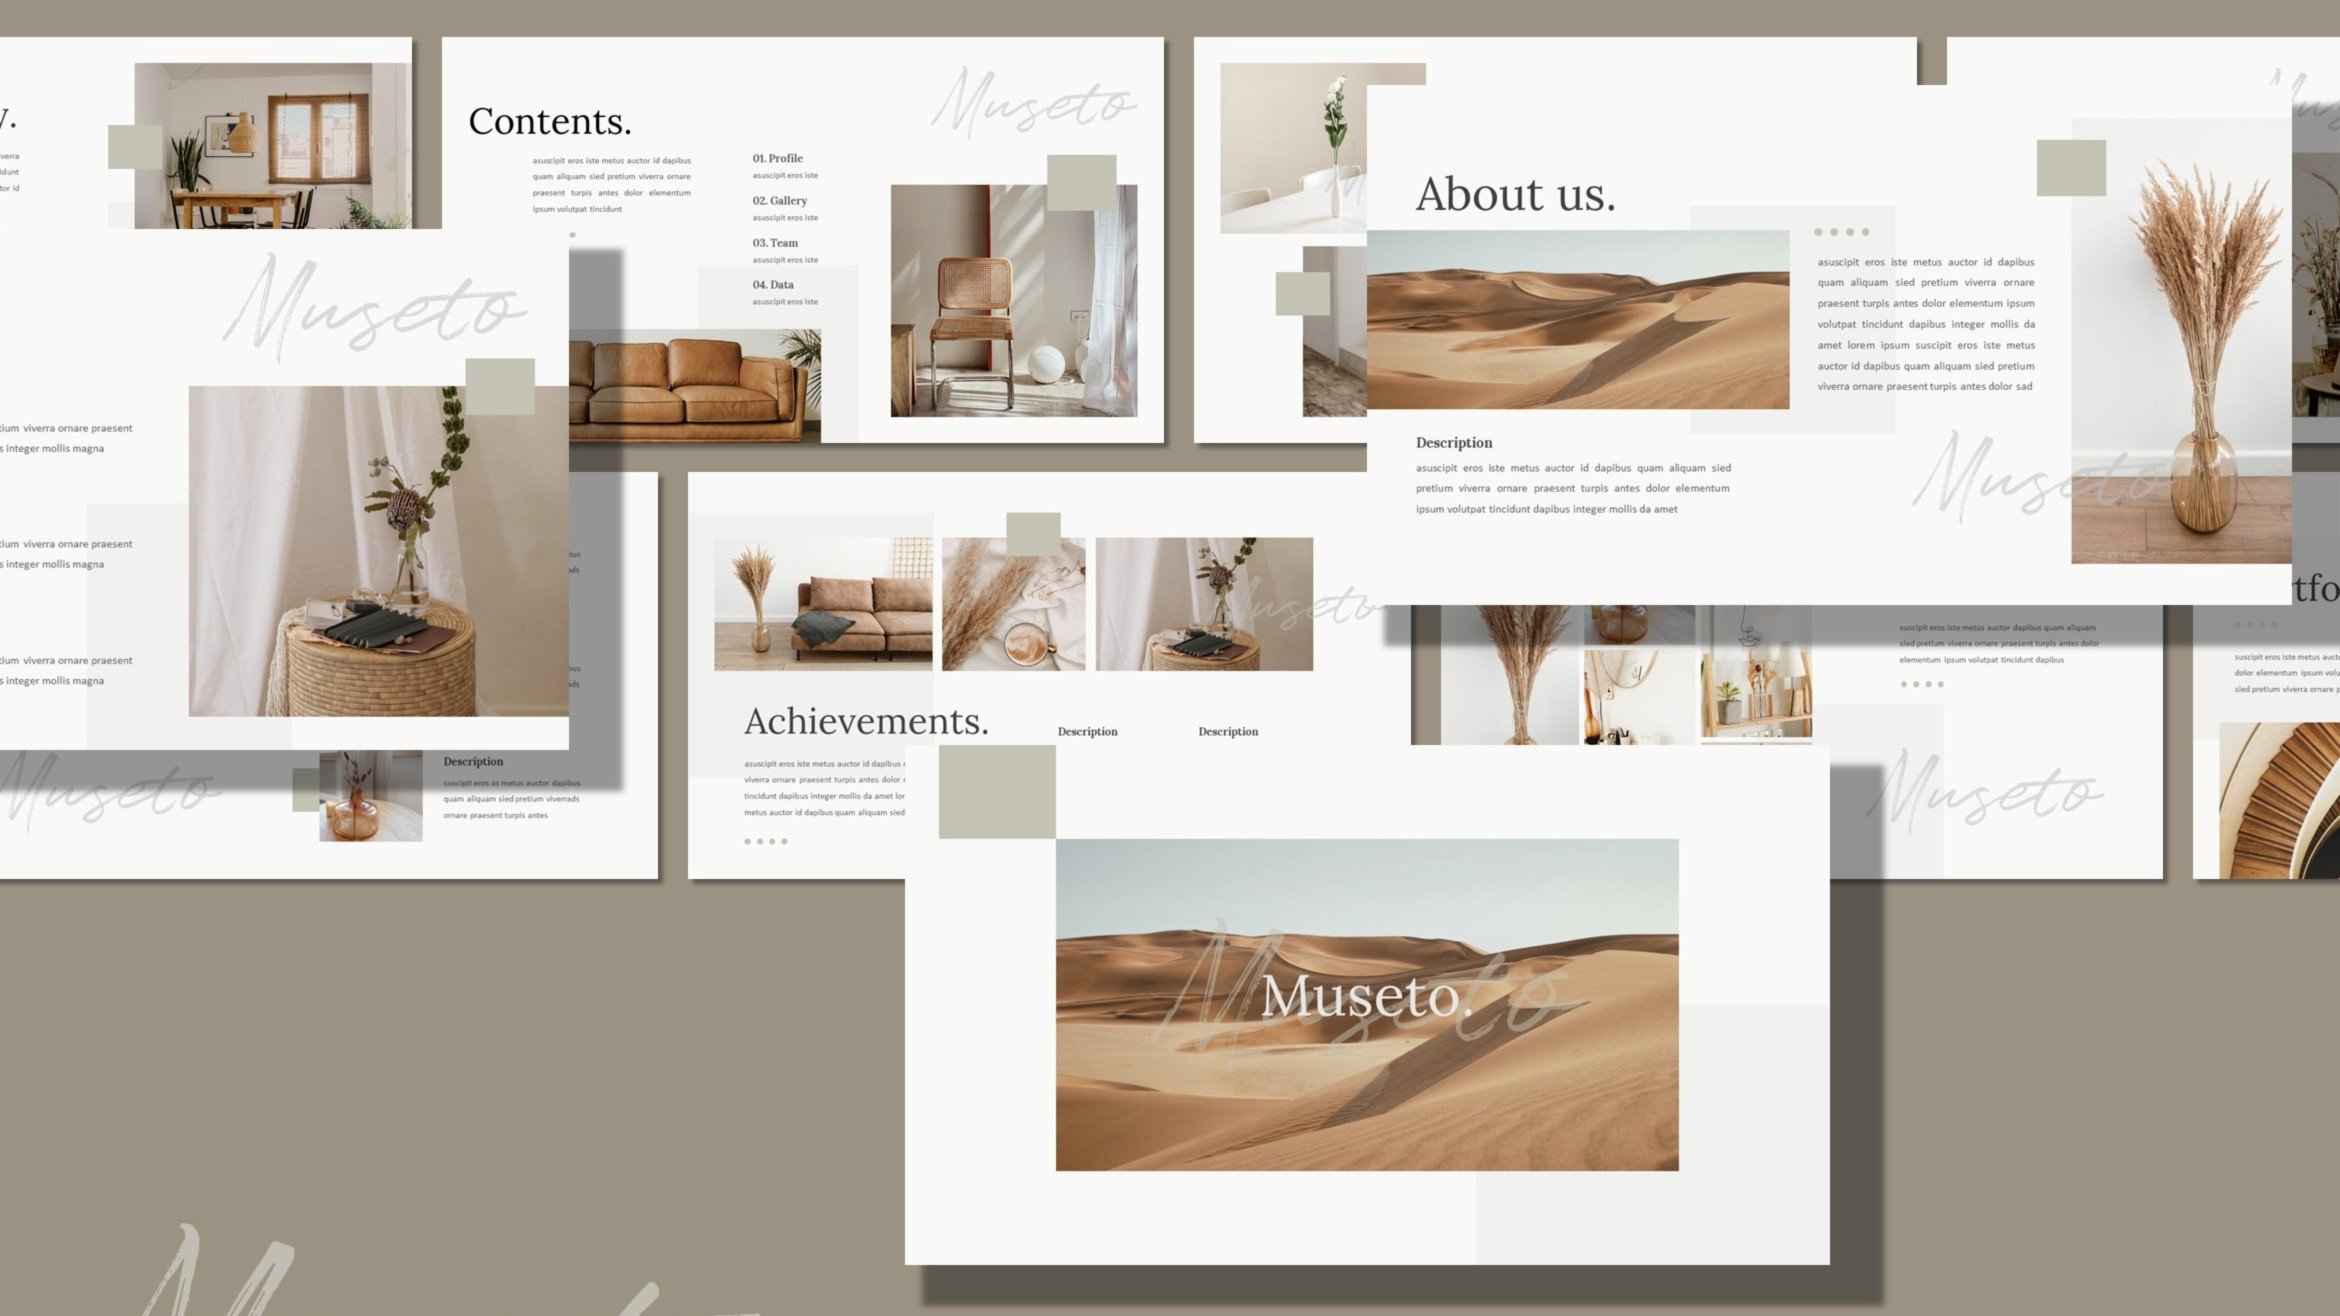 Musetto - Minimal Aesthetic PowerPoint Presentation Template Free Download (8 Slides)